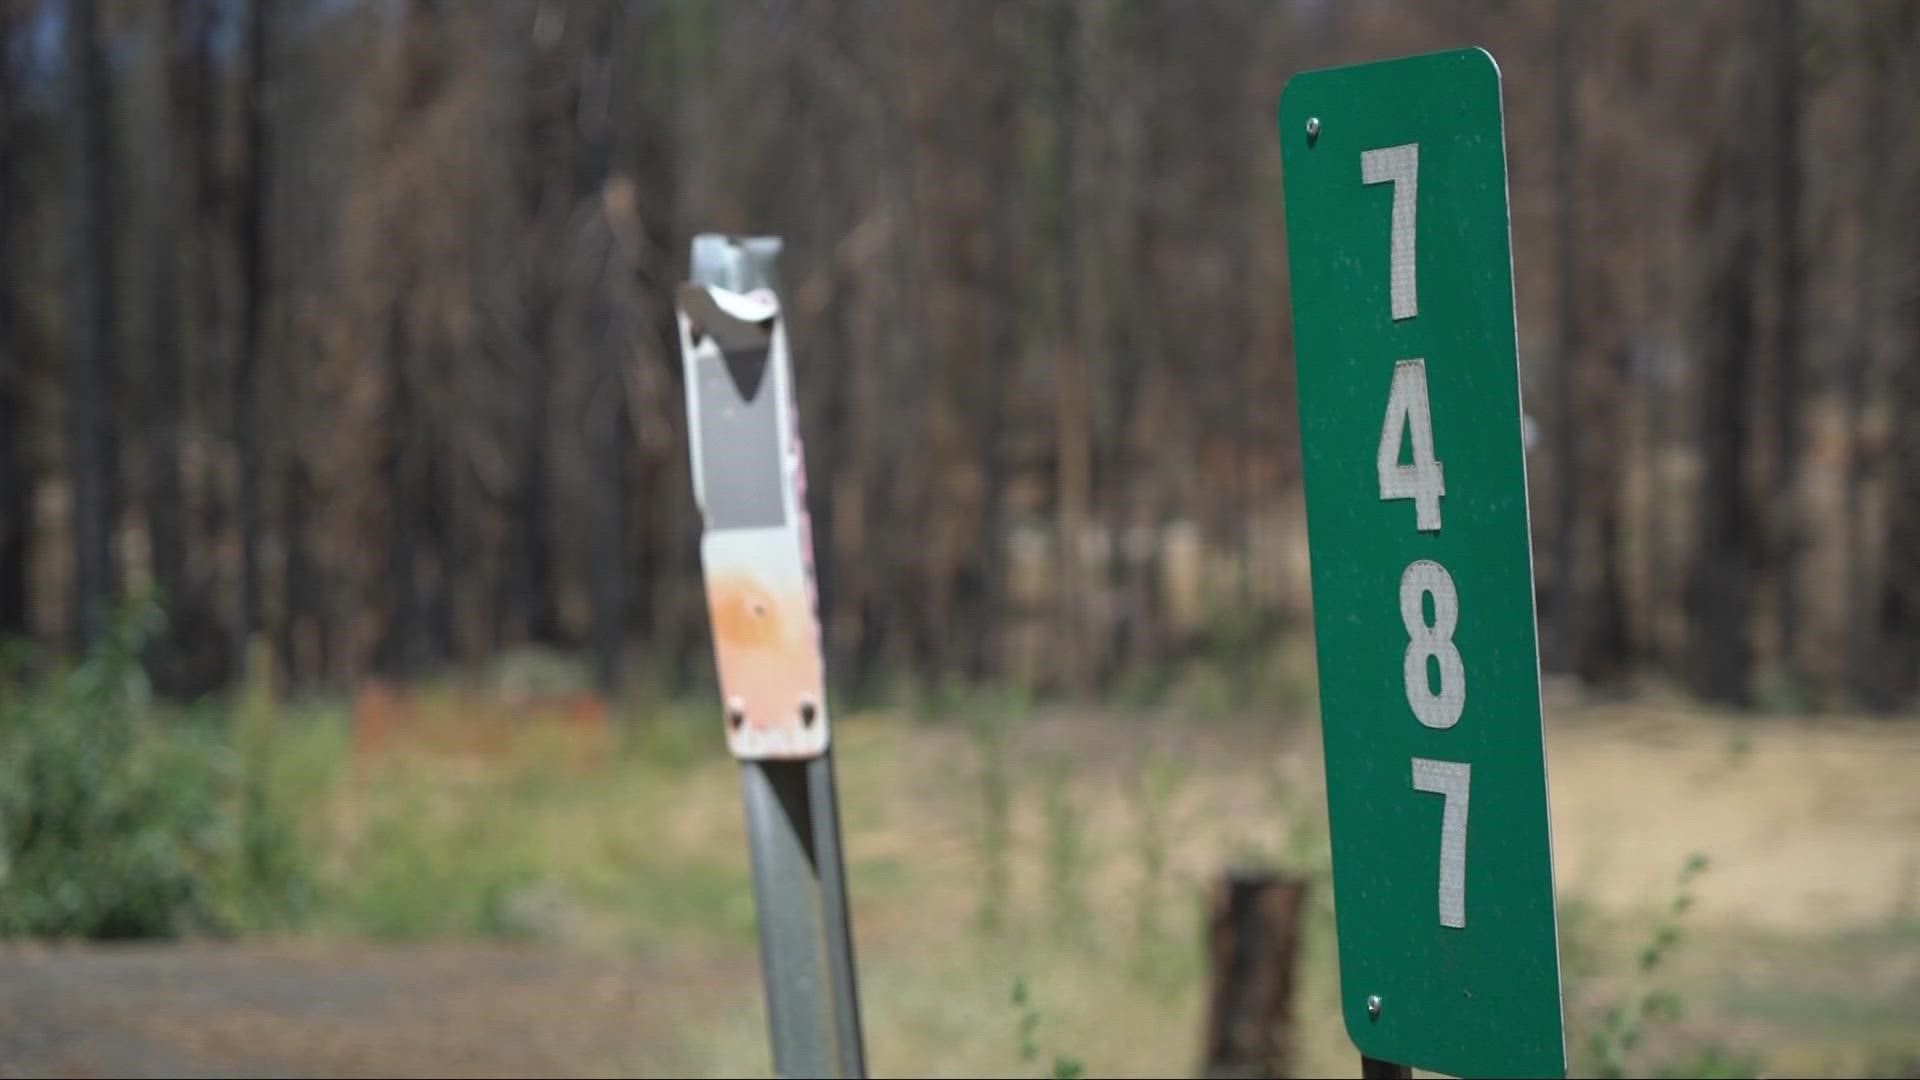 They lost their homes to the Caldor Fire. Now, these former Grizzly Flats residents are still being billed and fined for their water service connection.